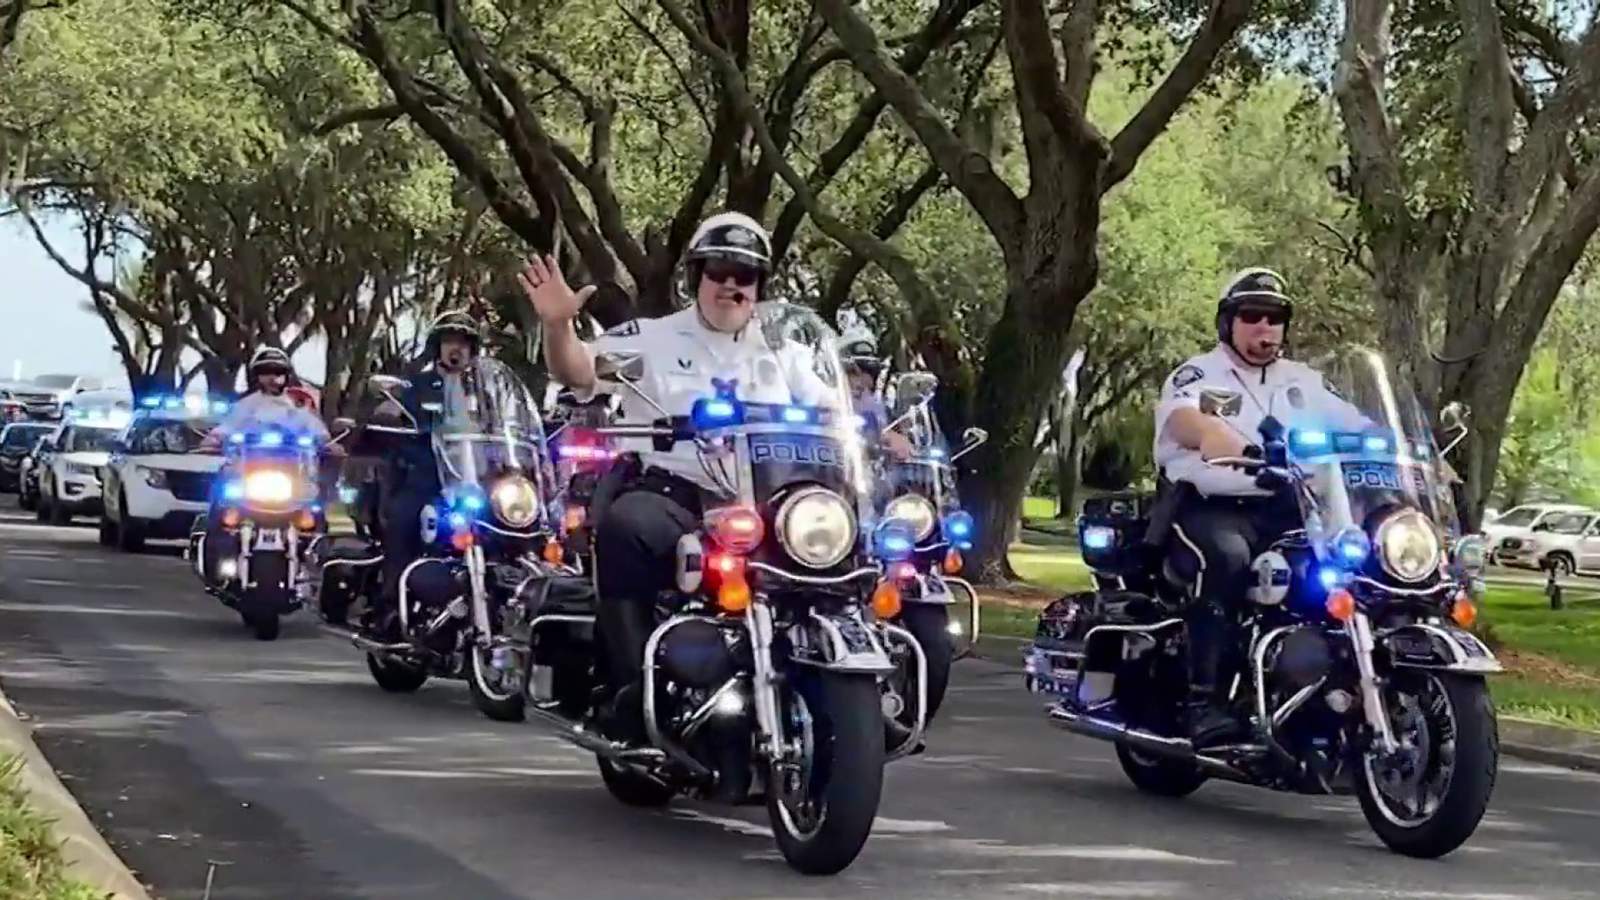 First responders hold parade in support of healthcare workers in Seminole County